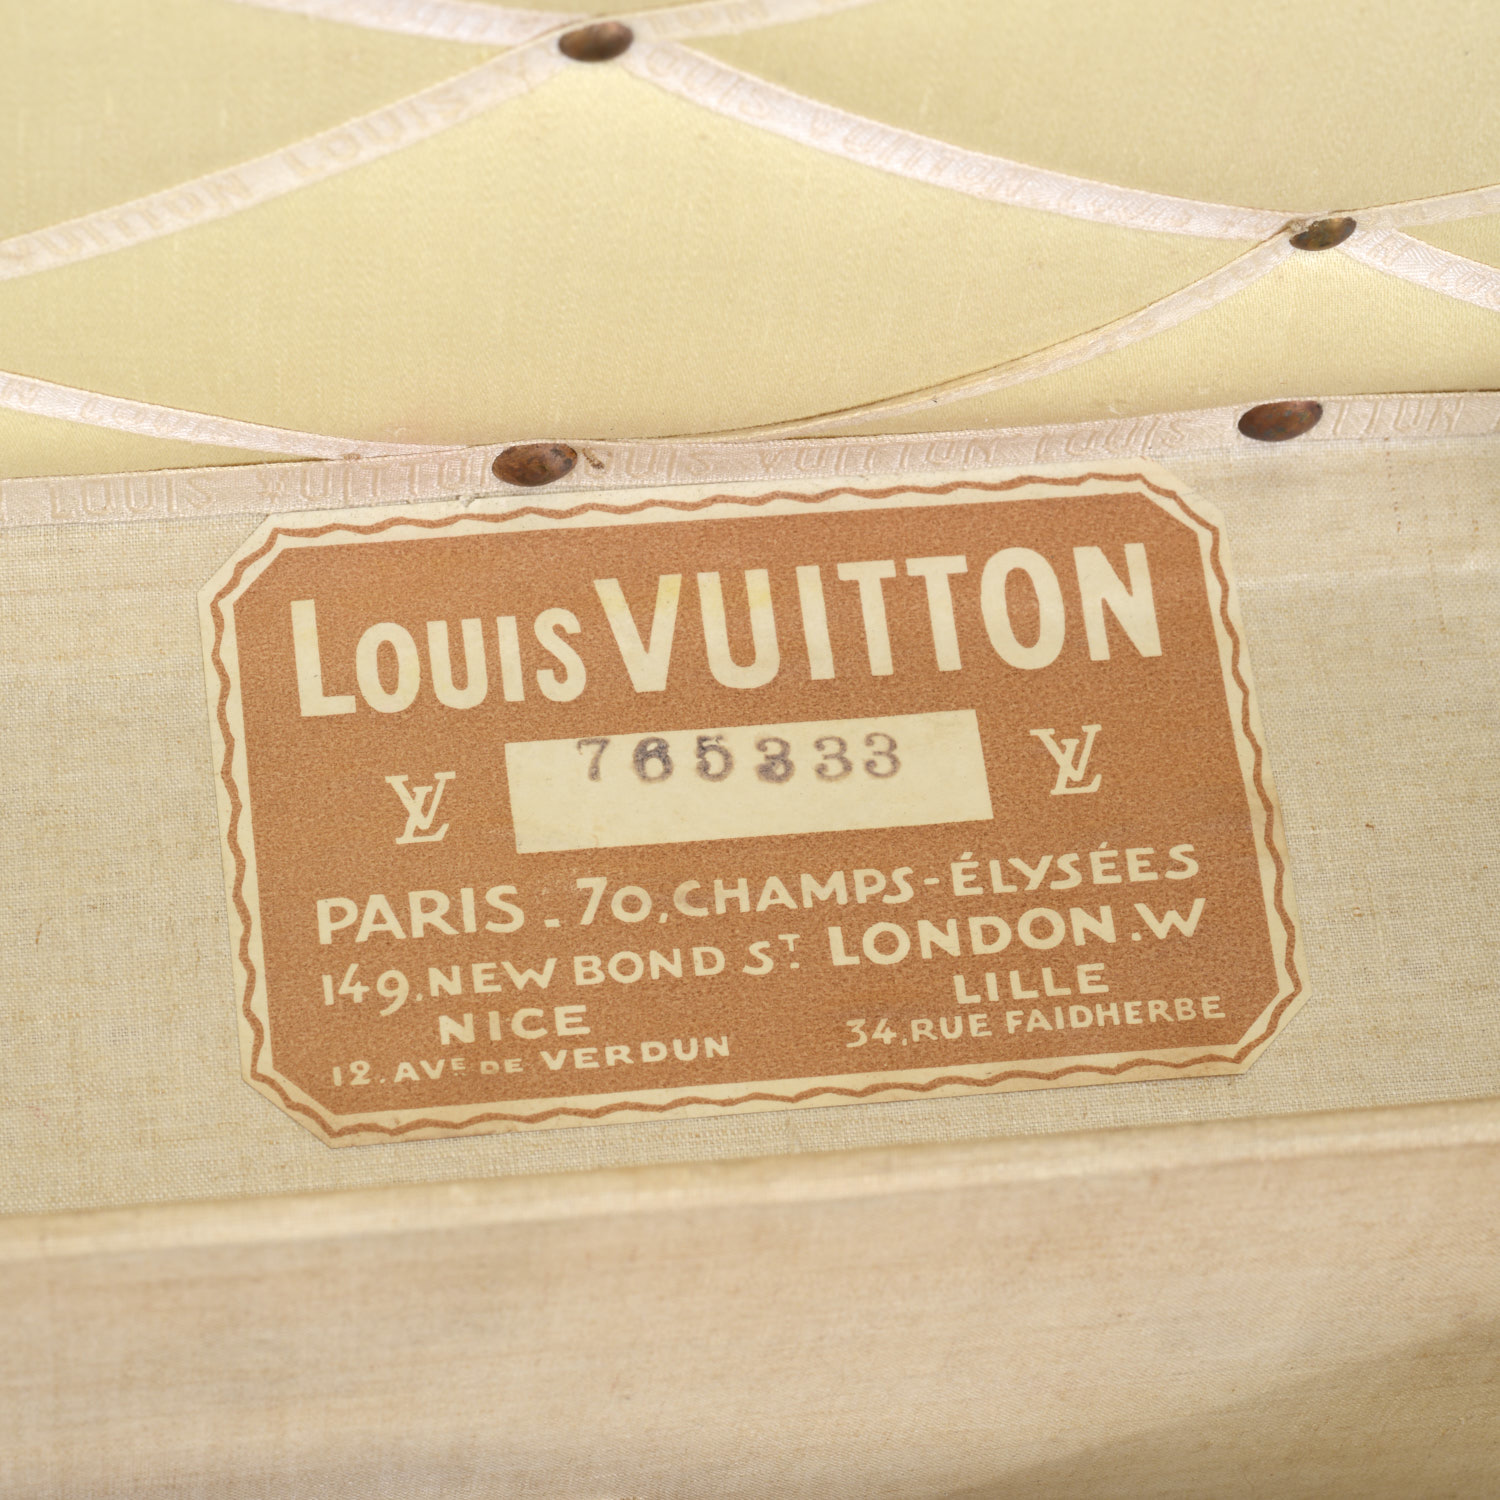 IH CHRISTIE'S SOUTH KENSINGTON THE SKI AND TRAVEL POSTERS & STEAMER TRUNKS  & LUGGAGE INCLUDING 19 LOUIS VUITTON SALE CODE 8174